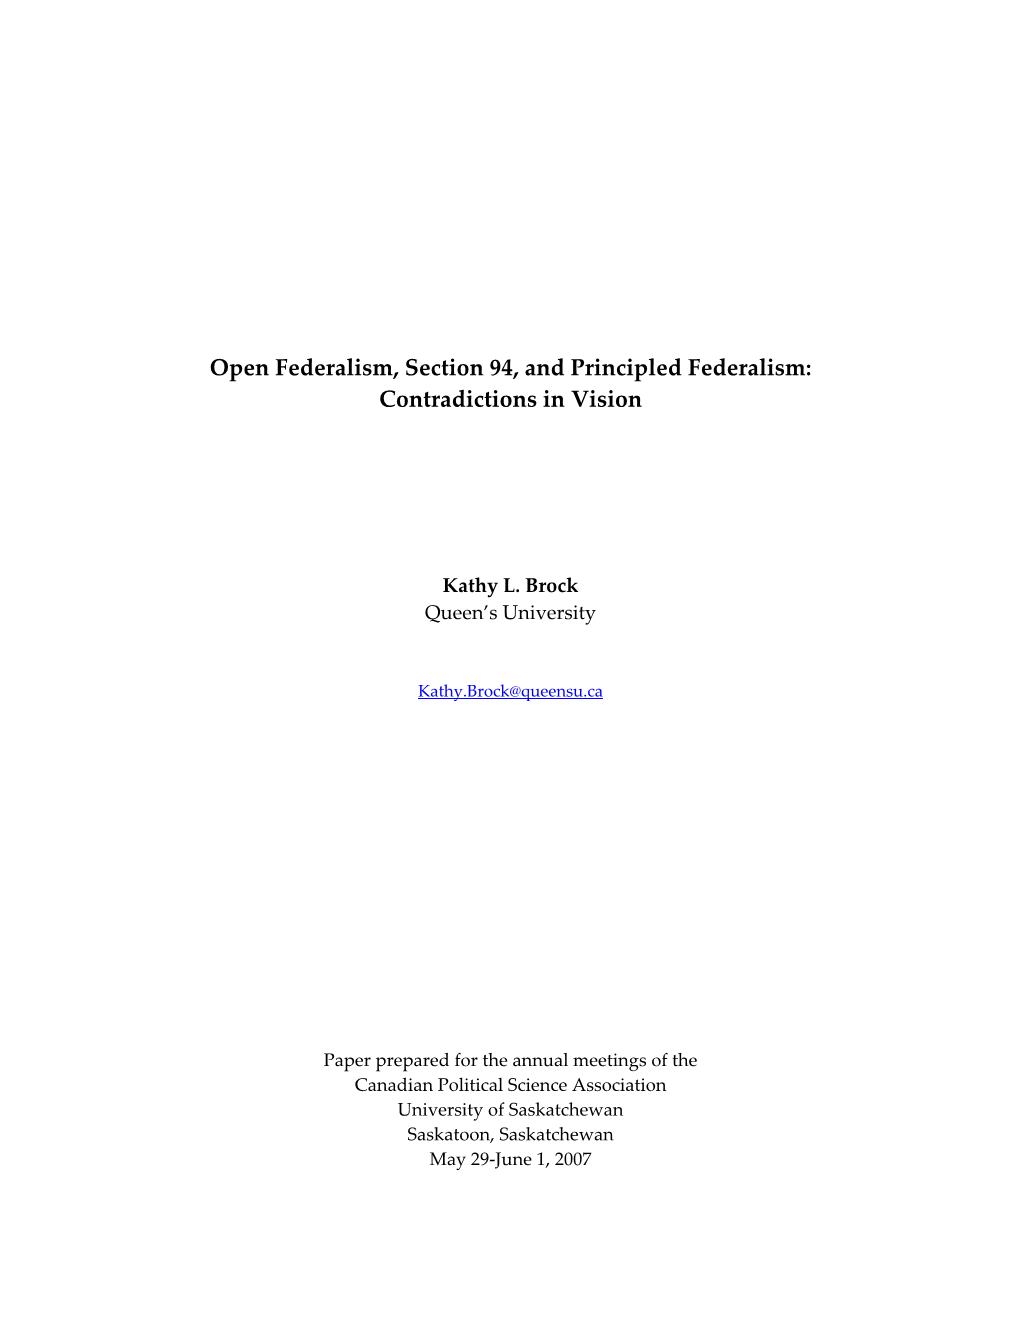 Open Federalism, Fiscal Imbalance and Section 94: Contradictions in Vision